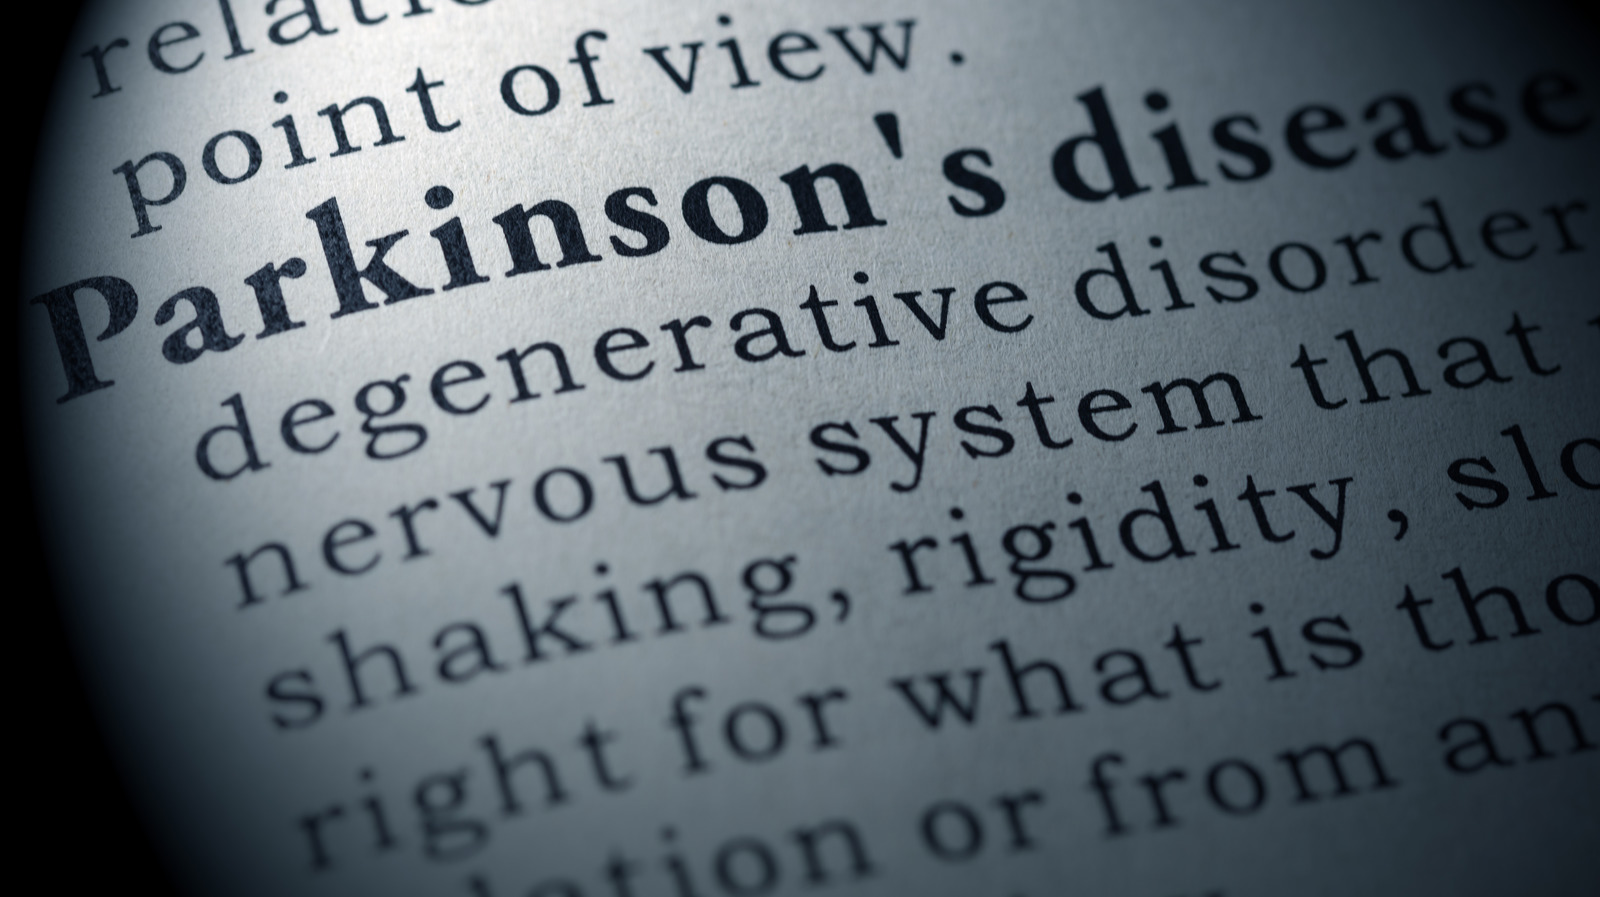 The Person Who Parkinson